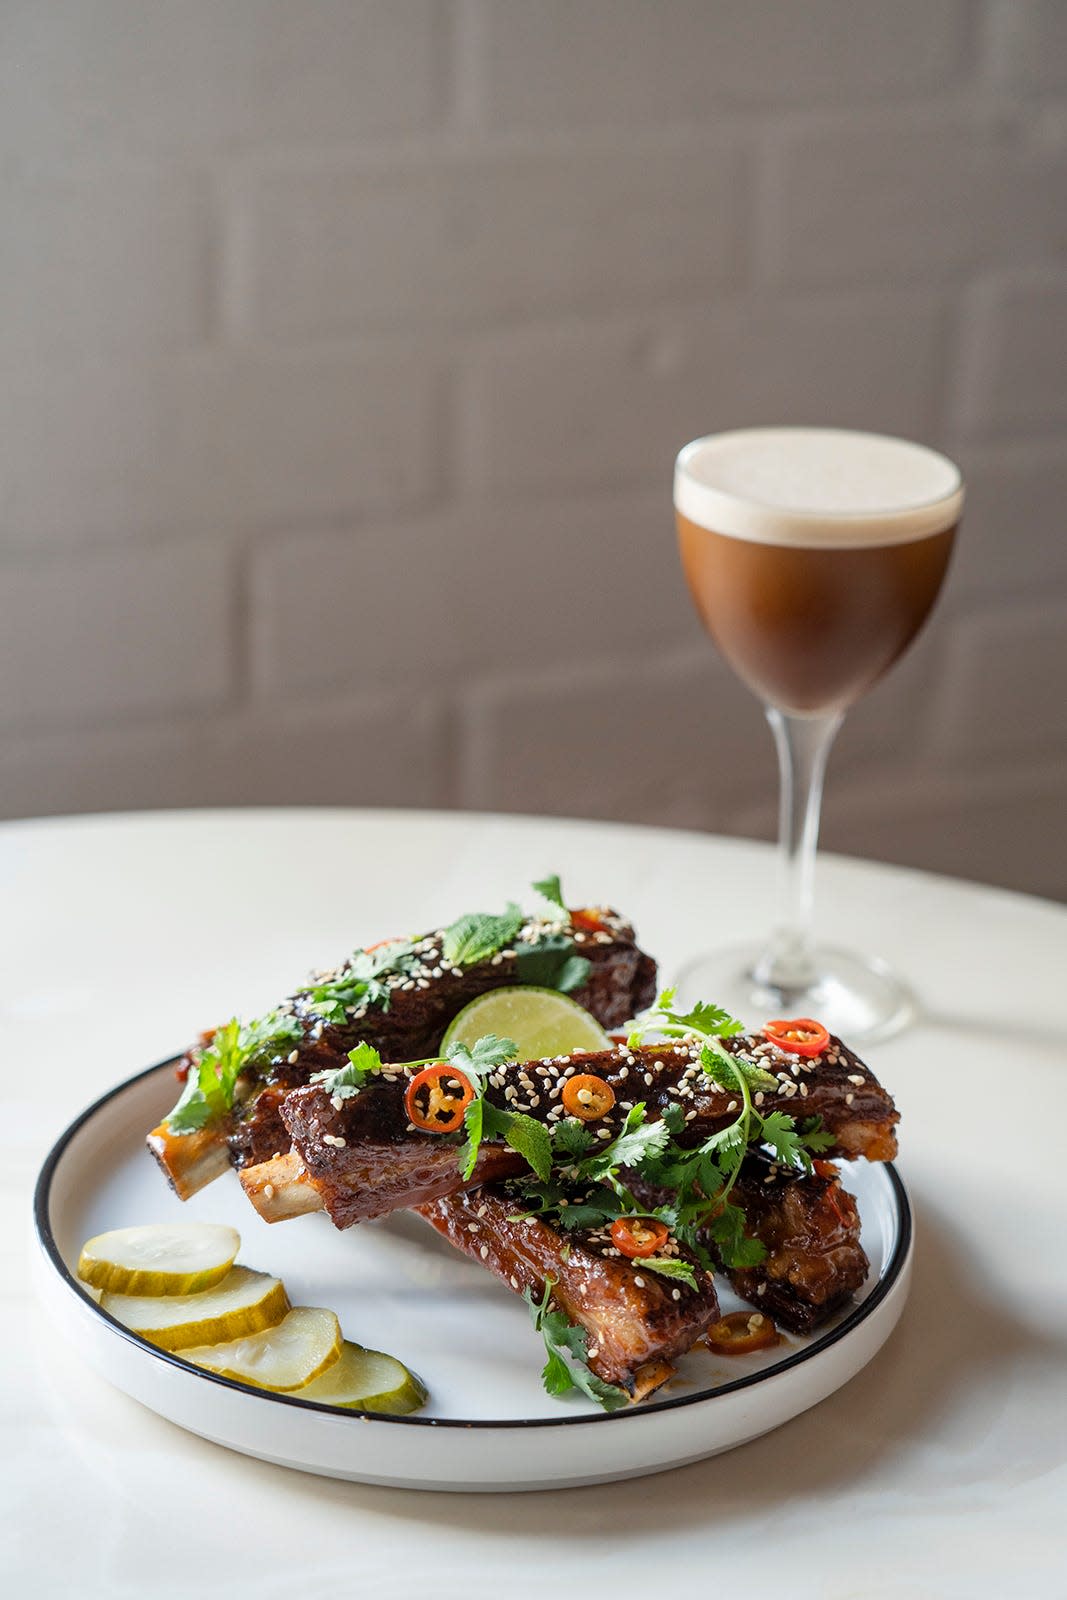 The honey-glazed ribs will make a mess out of you, and so will one too many of the espresso martinis at Holiday on 7th.